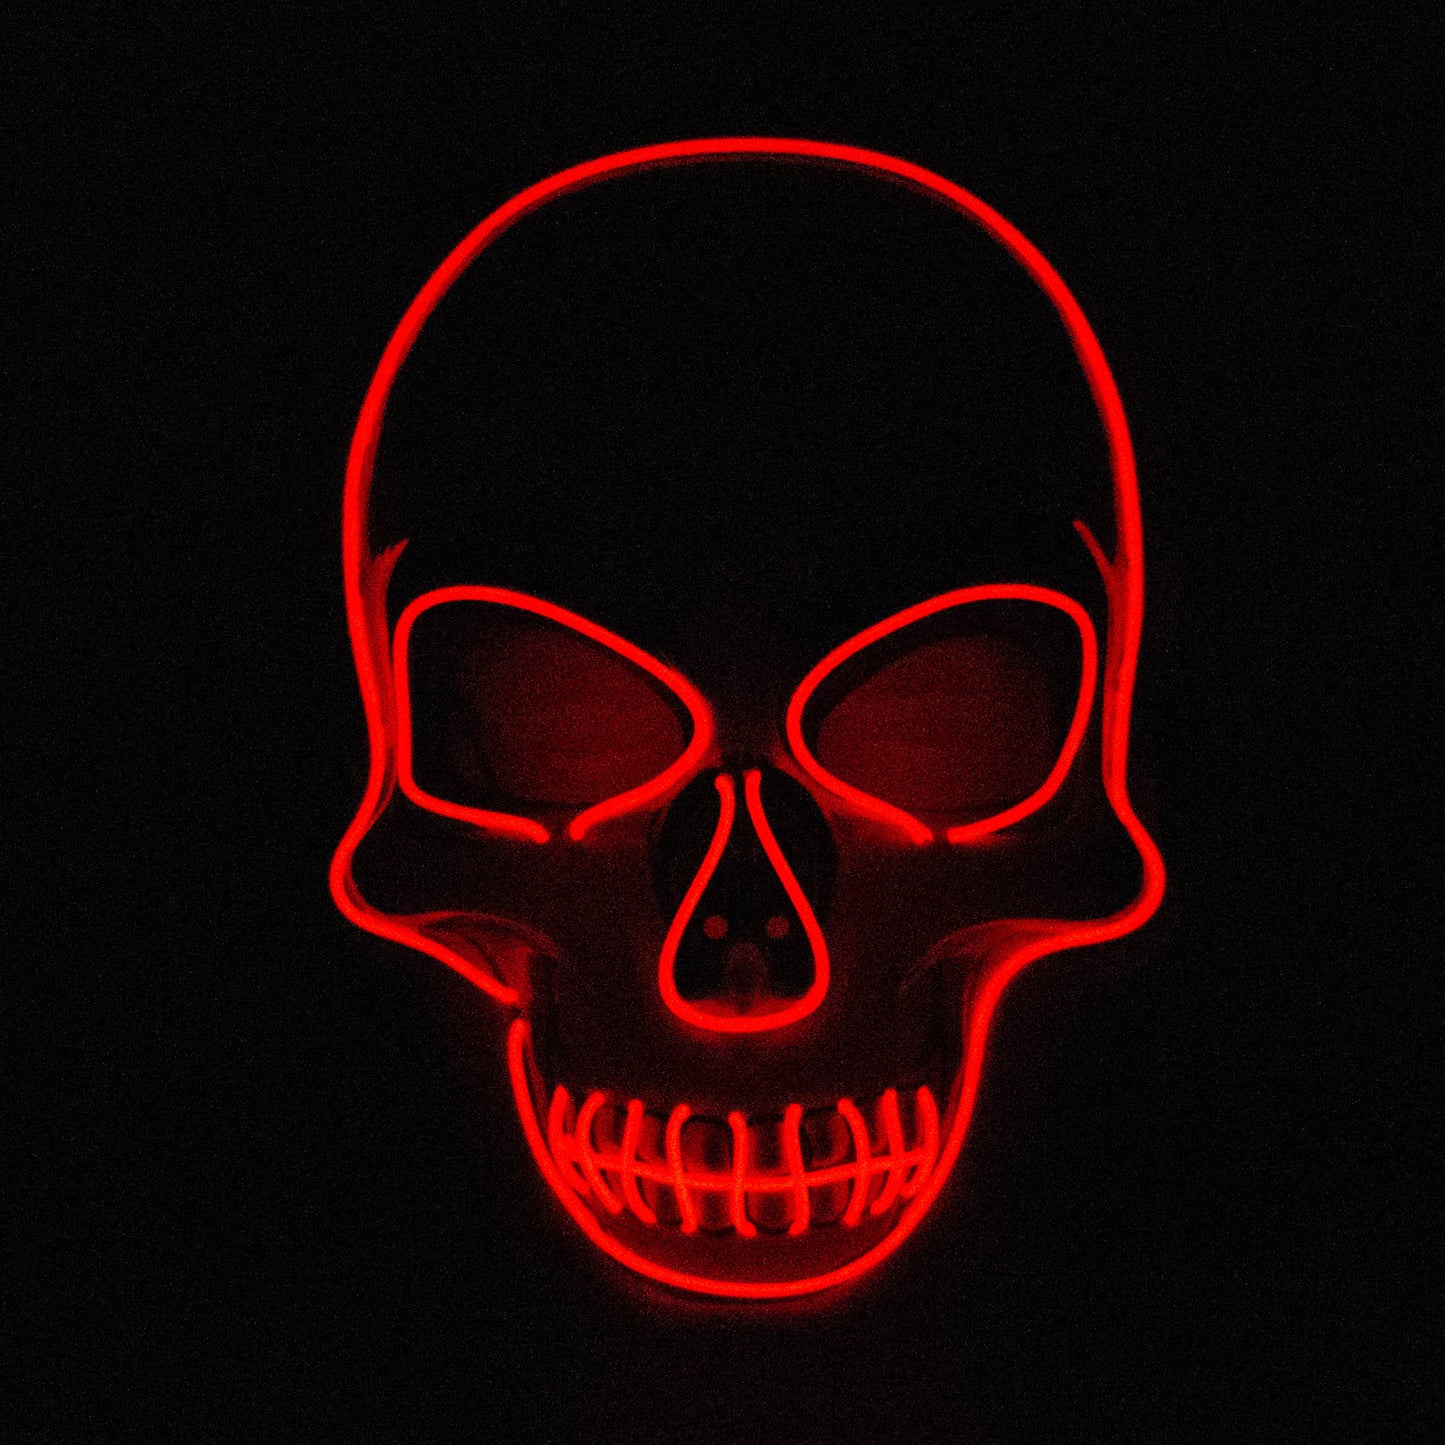 LED Neon Skull Mask for party or Halloween Costume_4